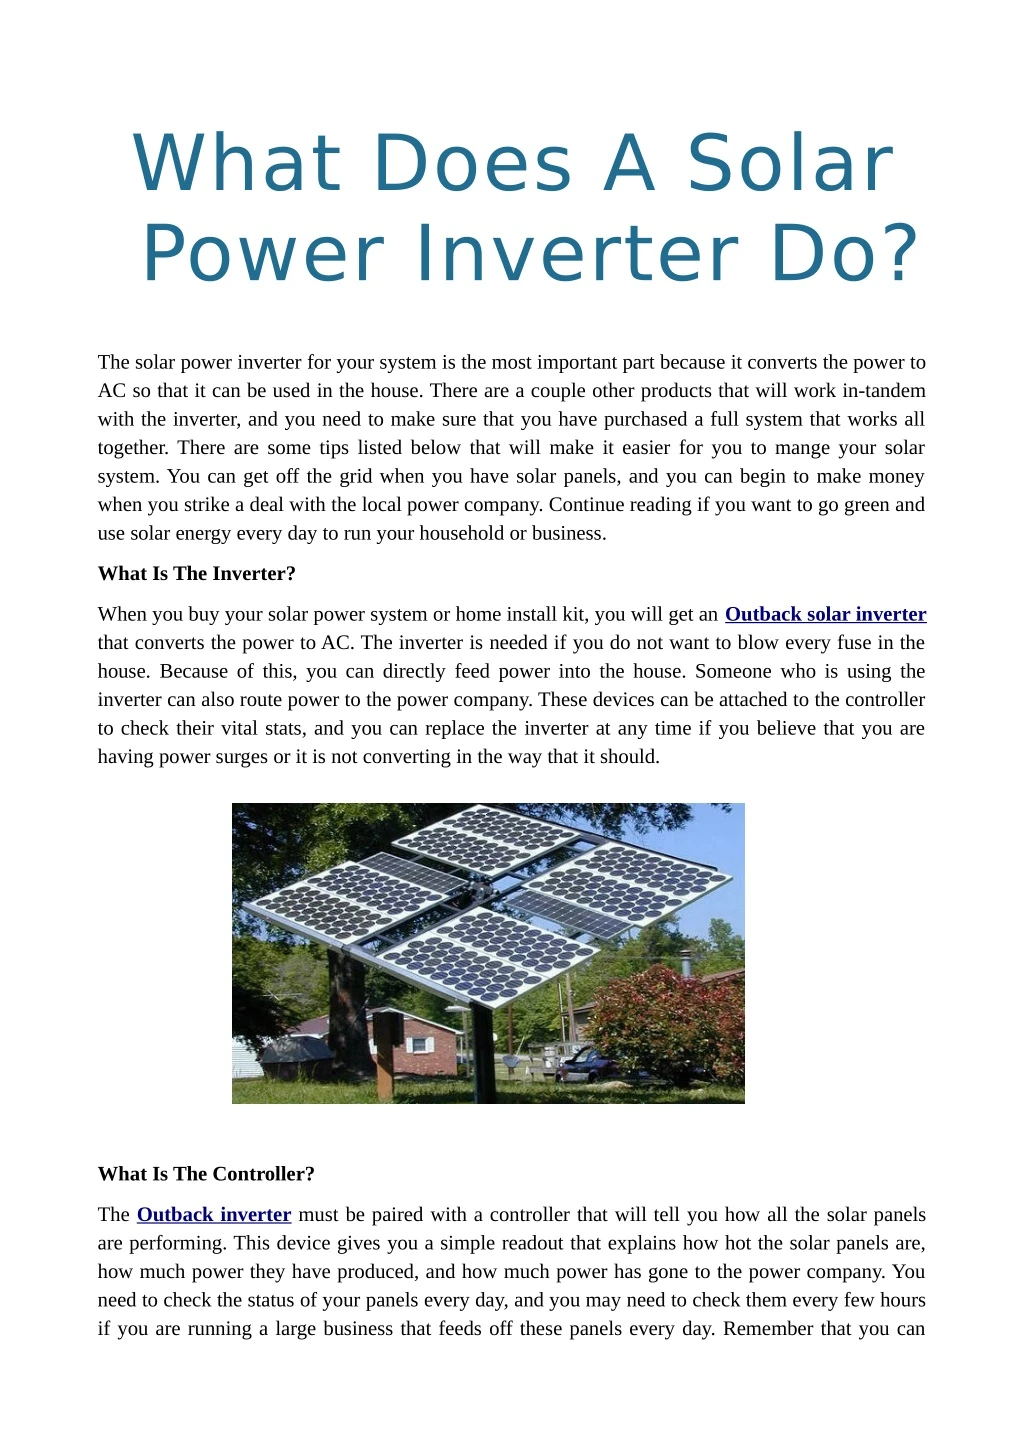 what does a solar power inverter do